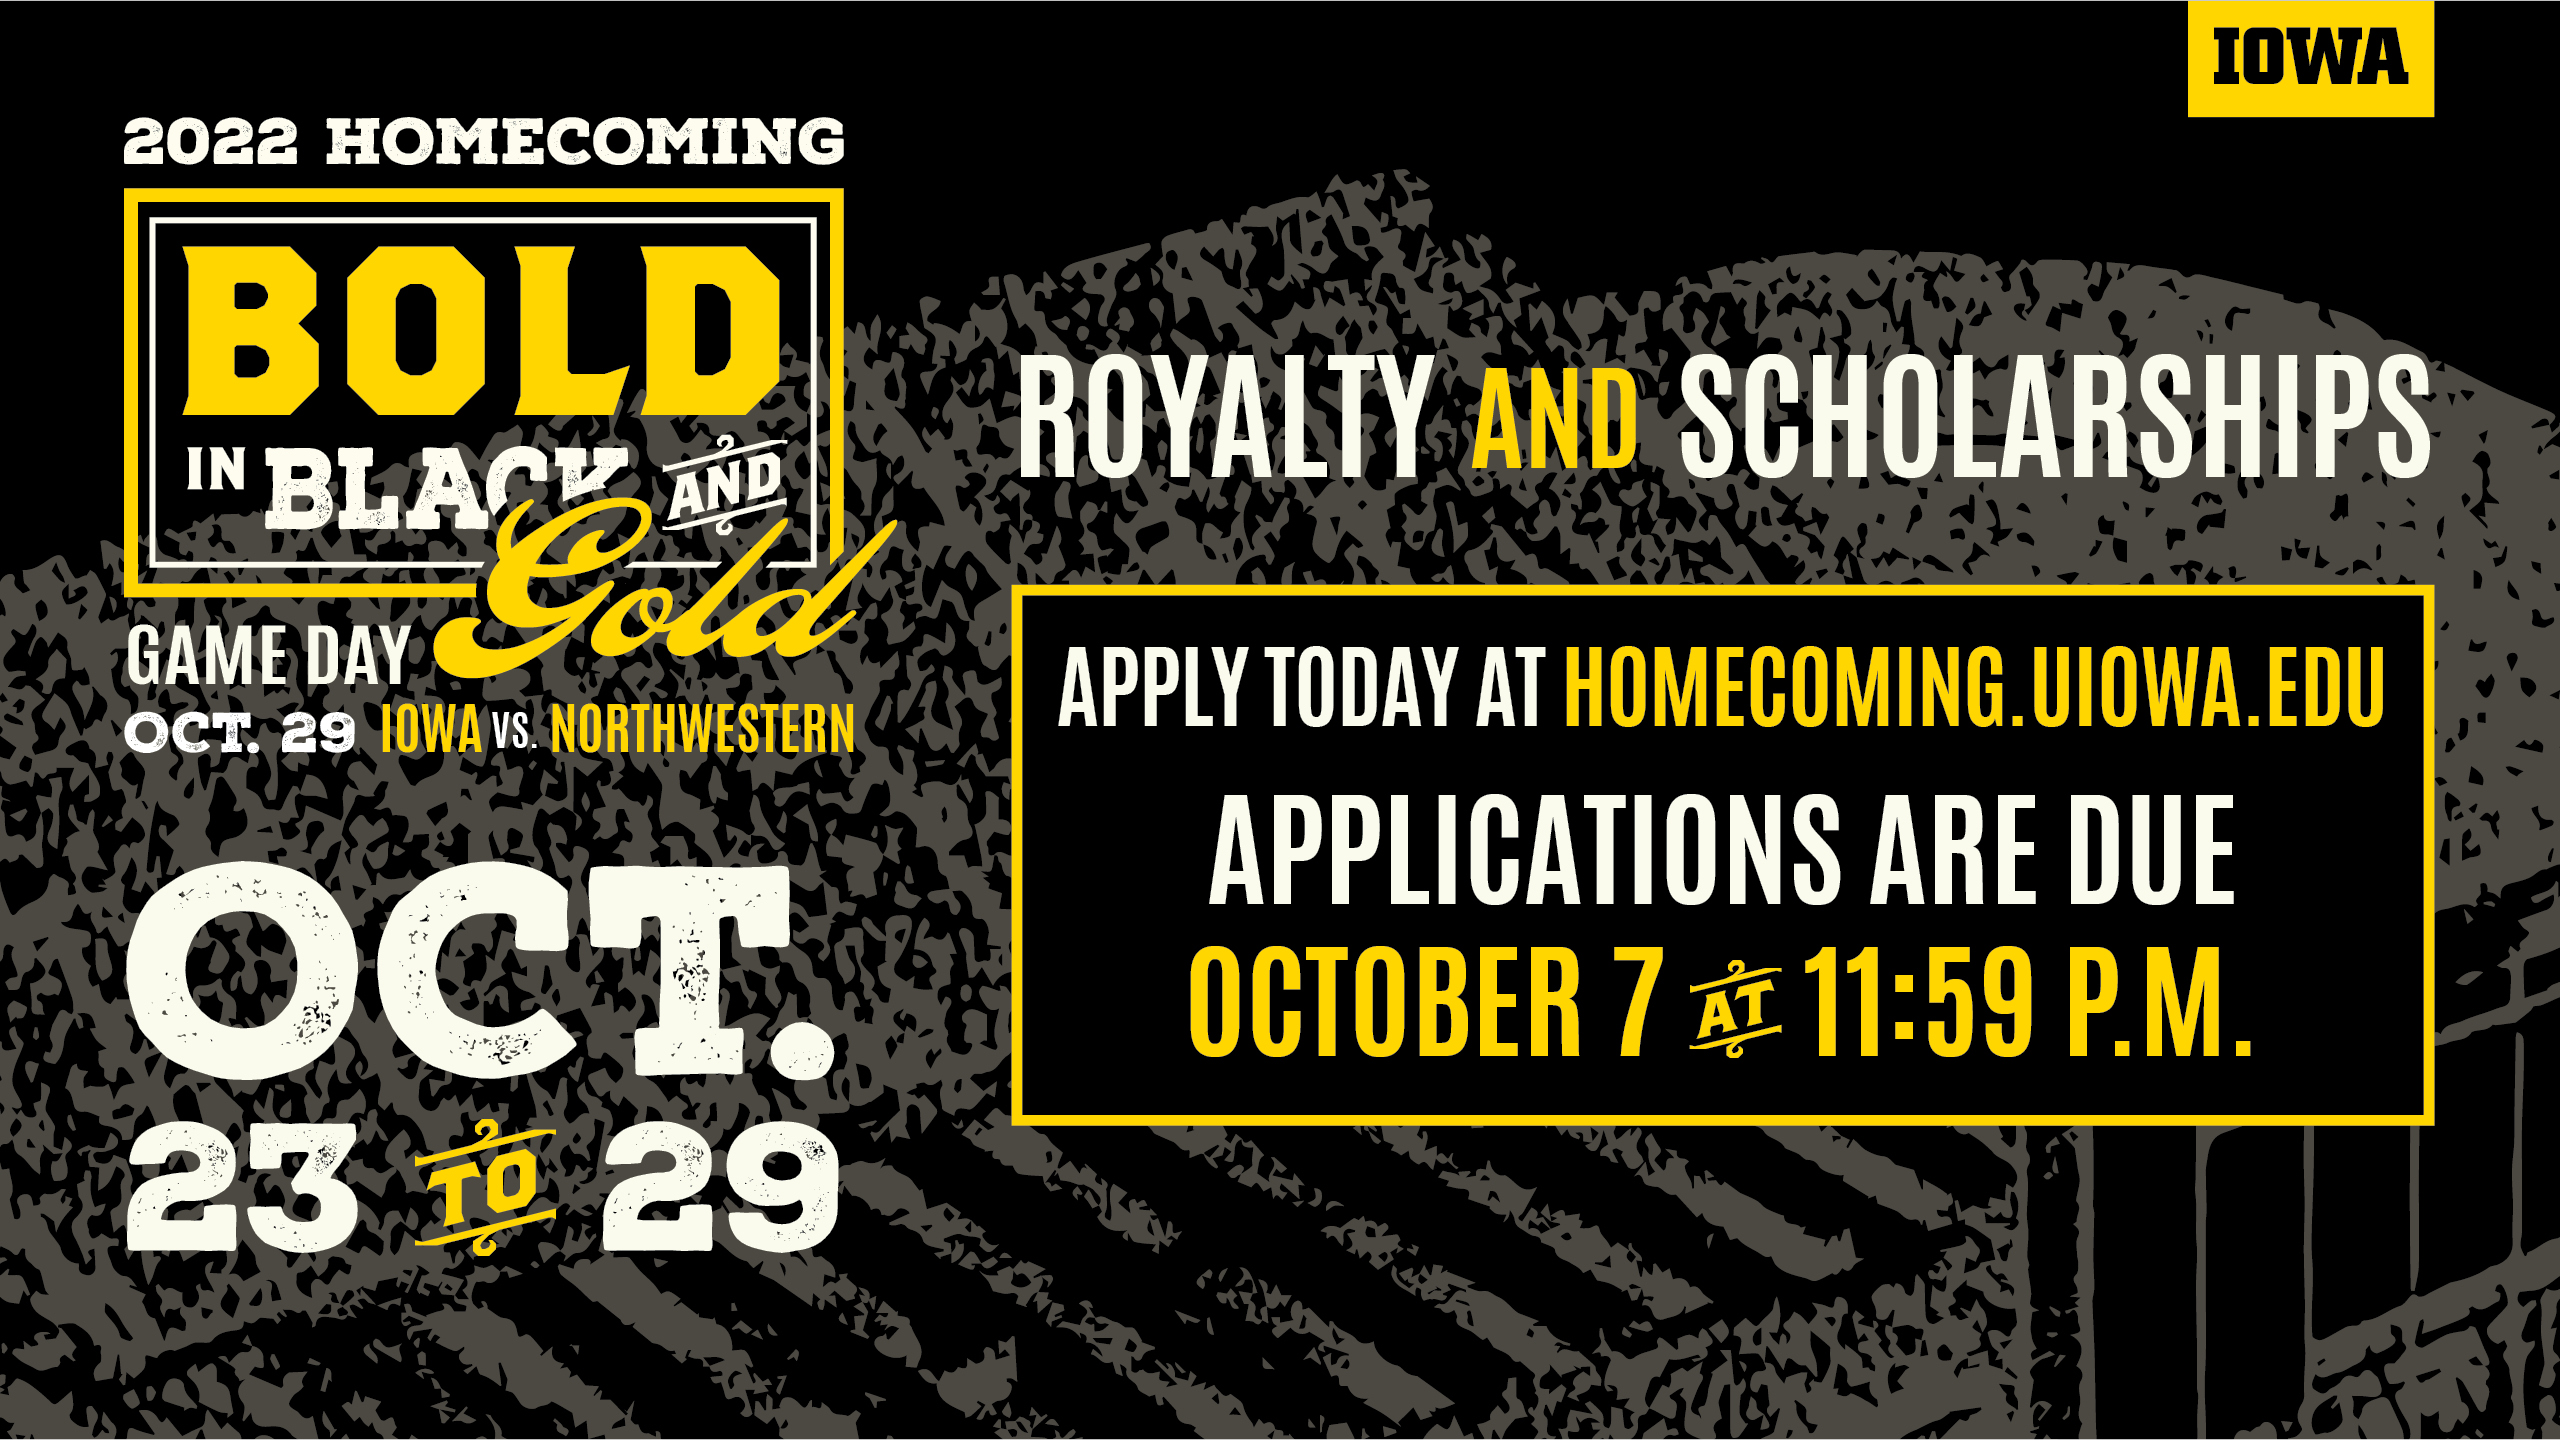 apply for homecoming royalty and scholarships by 10/7 at 11:59 p.m.!